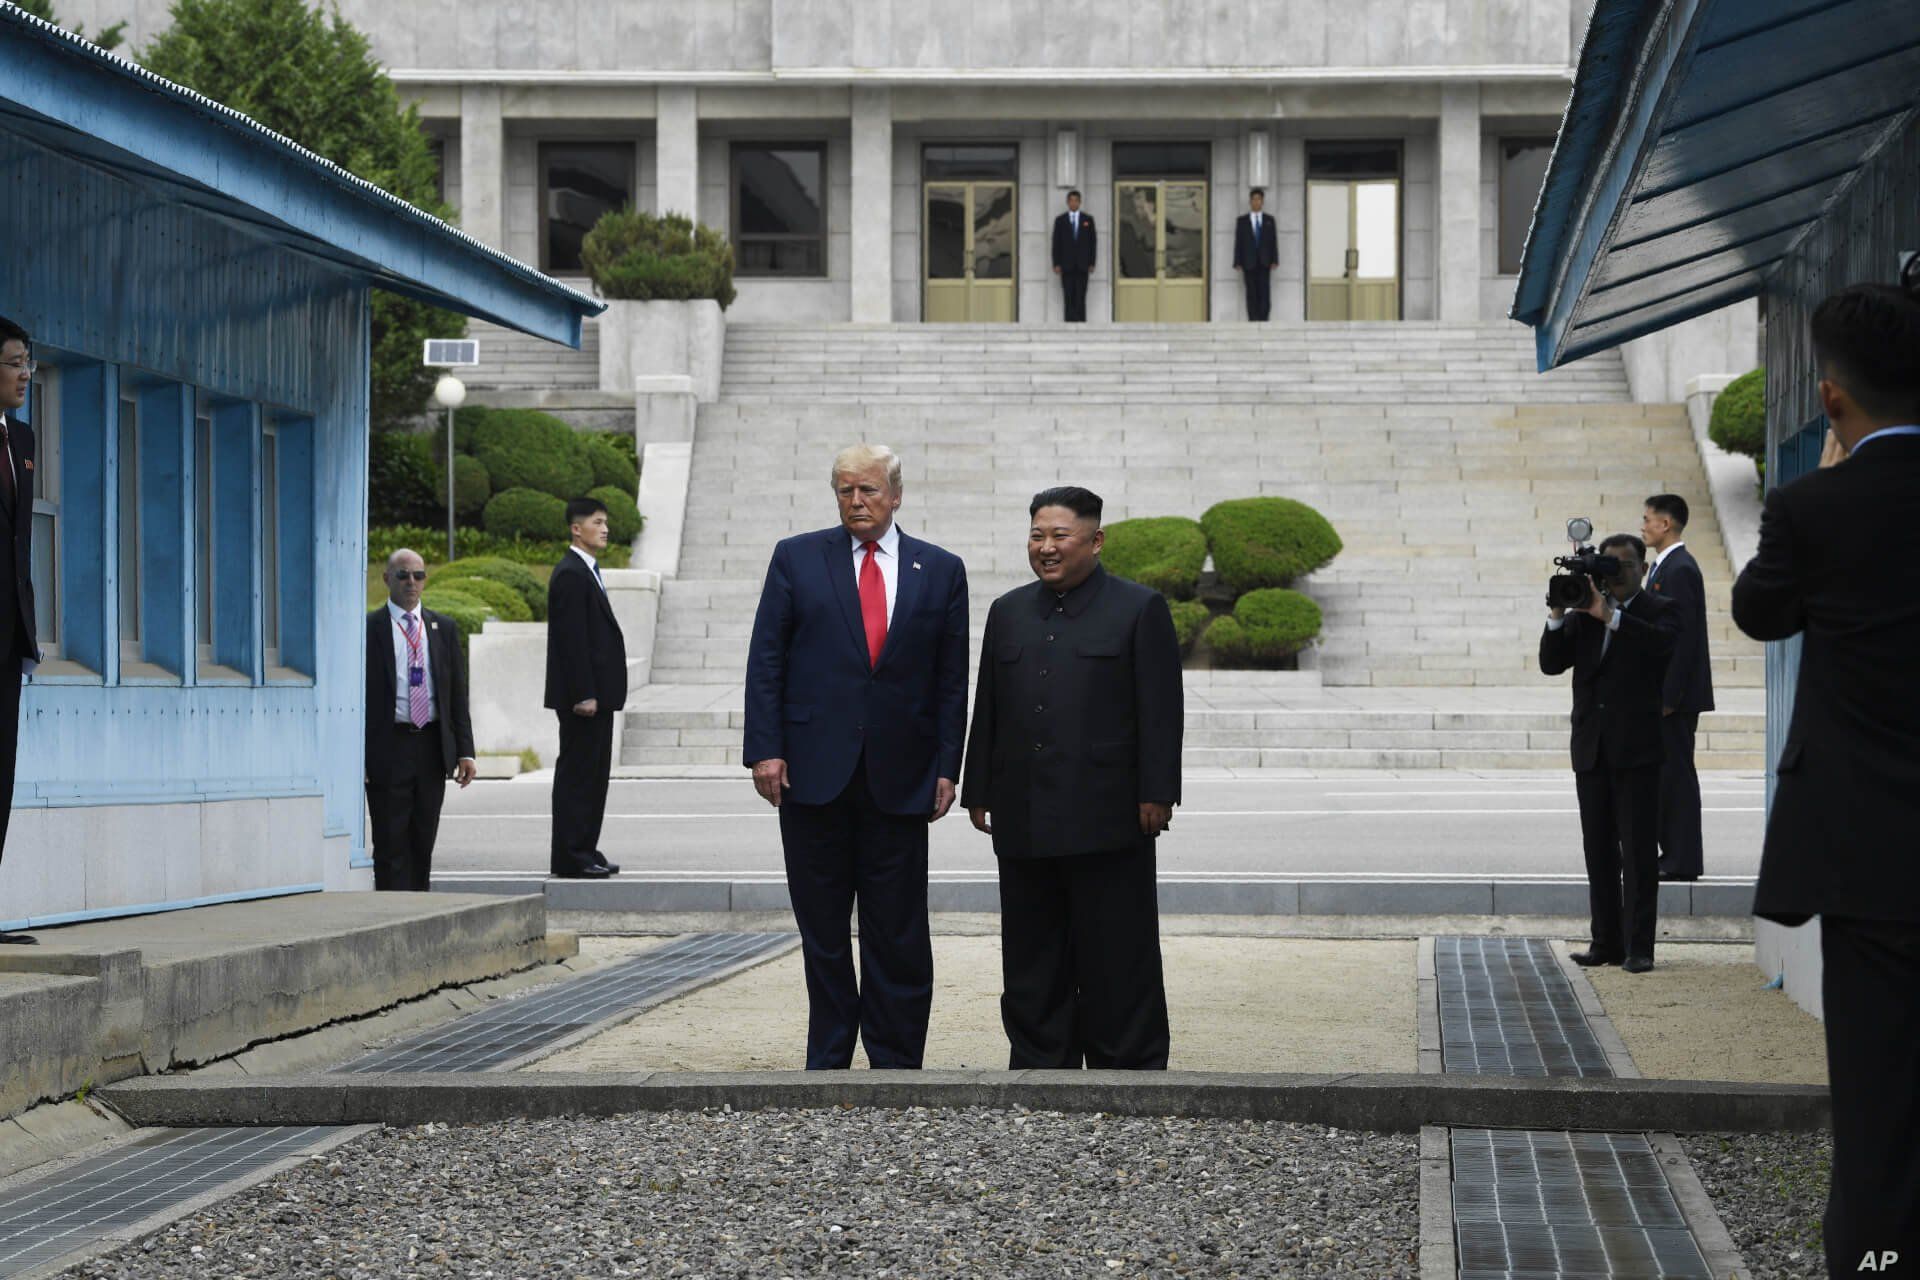 President Donald Trump and North Korean leader Kim Jong Un stand on the North Korean side in the Demilitarized Zone, Sunday, June 30, 2019 at Panmunjom. (AP Photo/Susan Walsh)